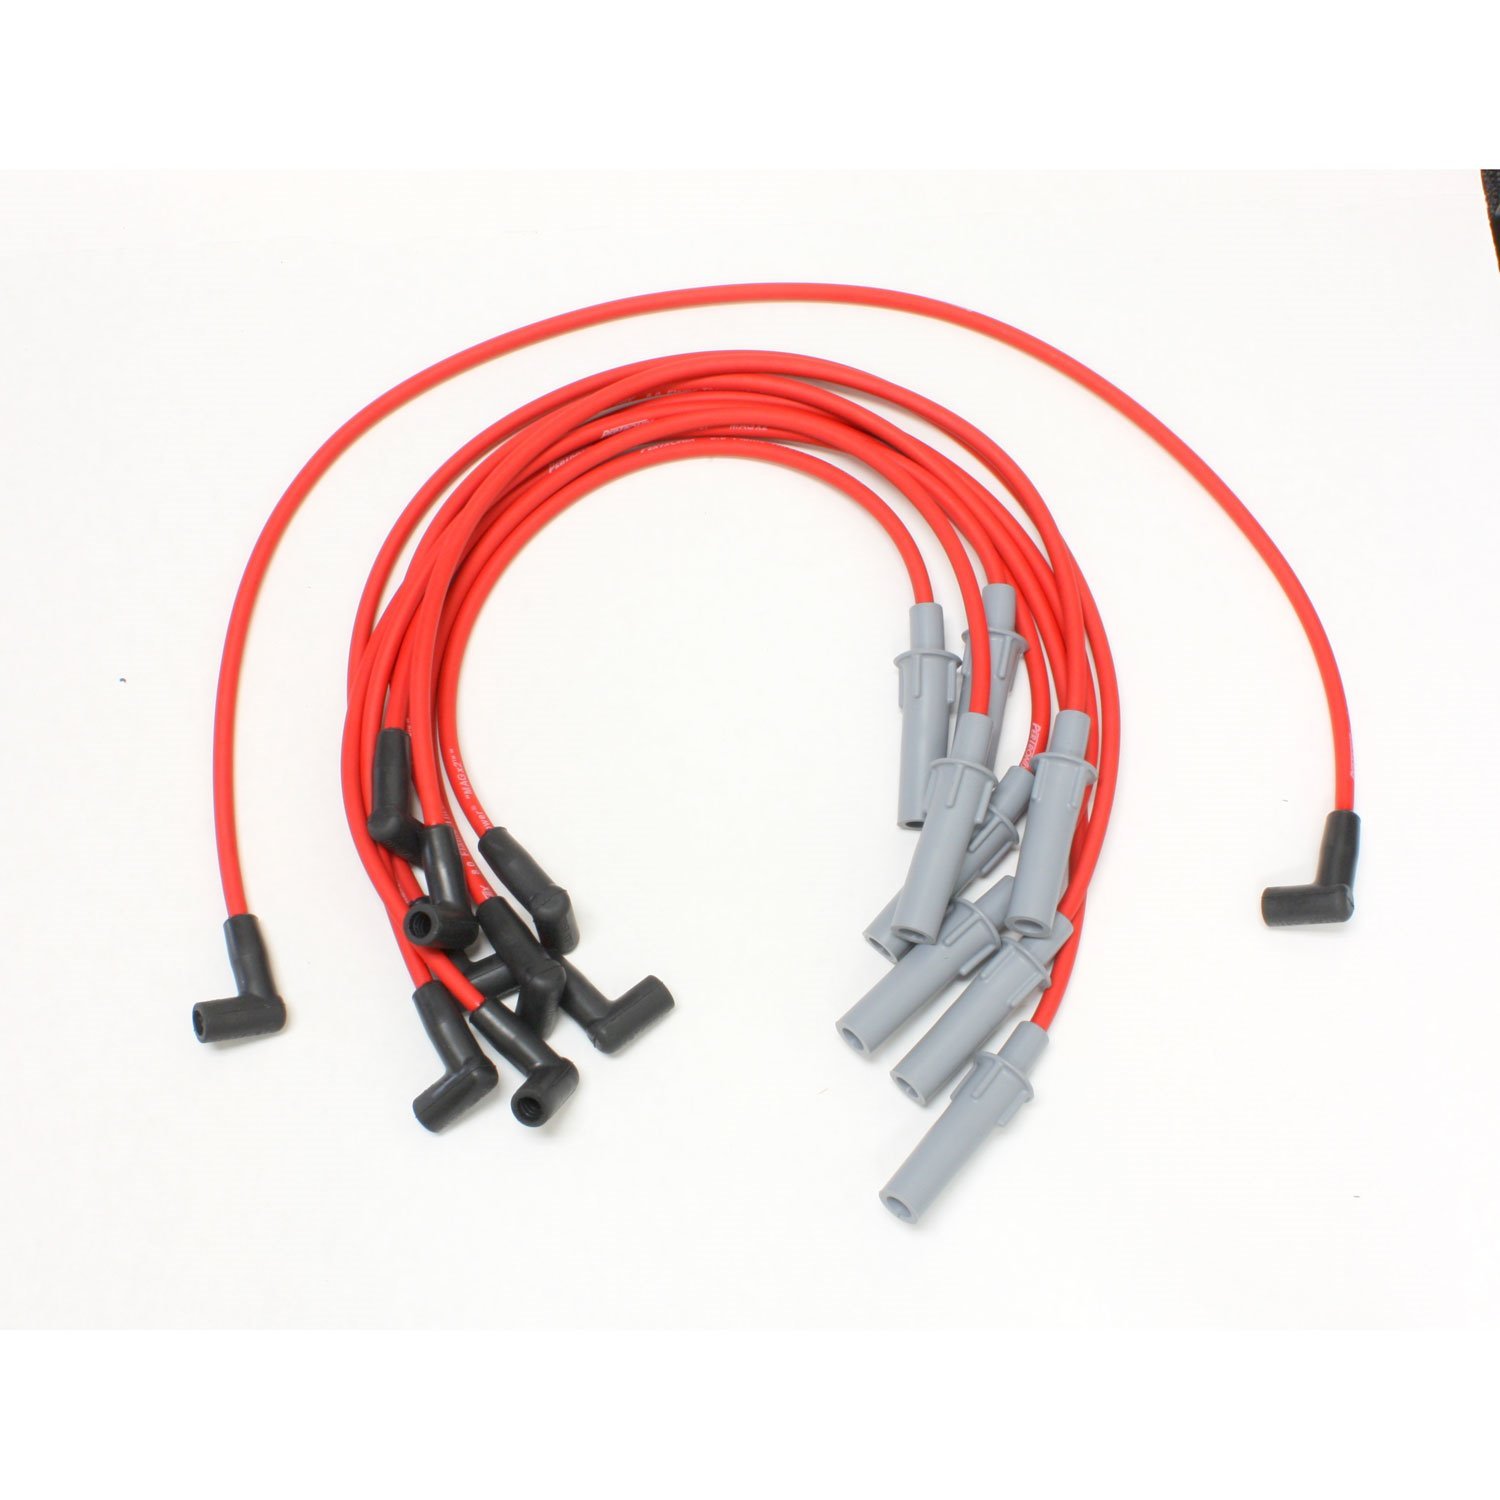 PerTronix 808428 Flame-Thrower Spark Plug Wires 8 cyl Dodge Custom Fit Red